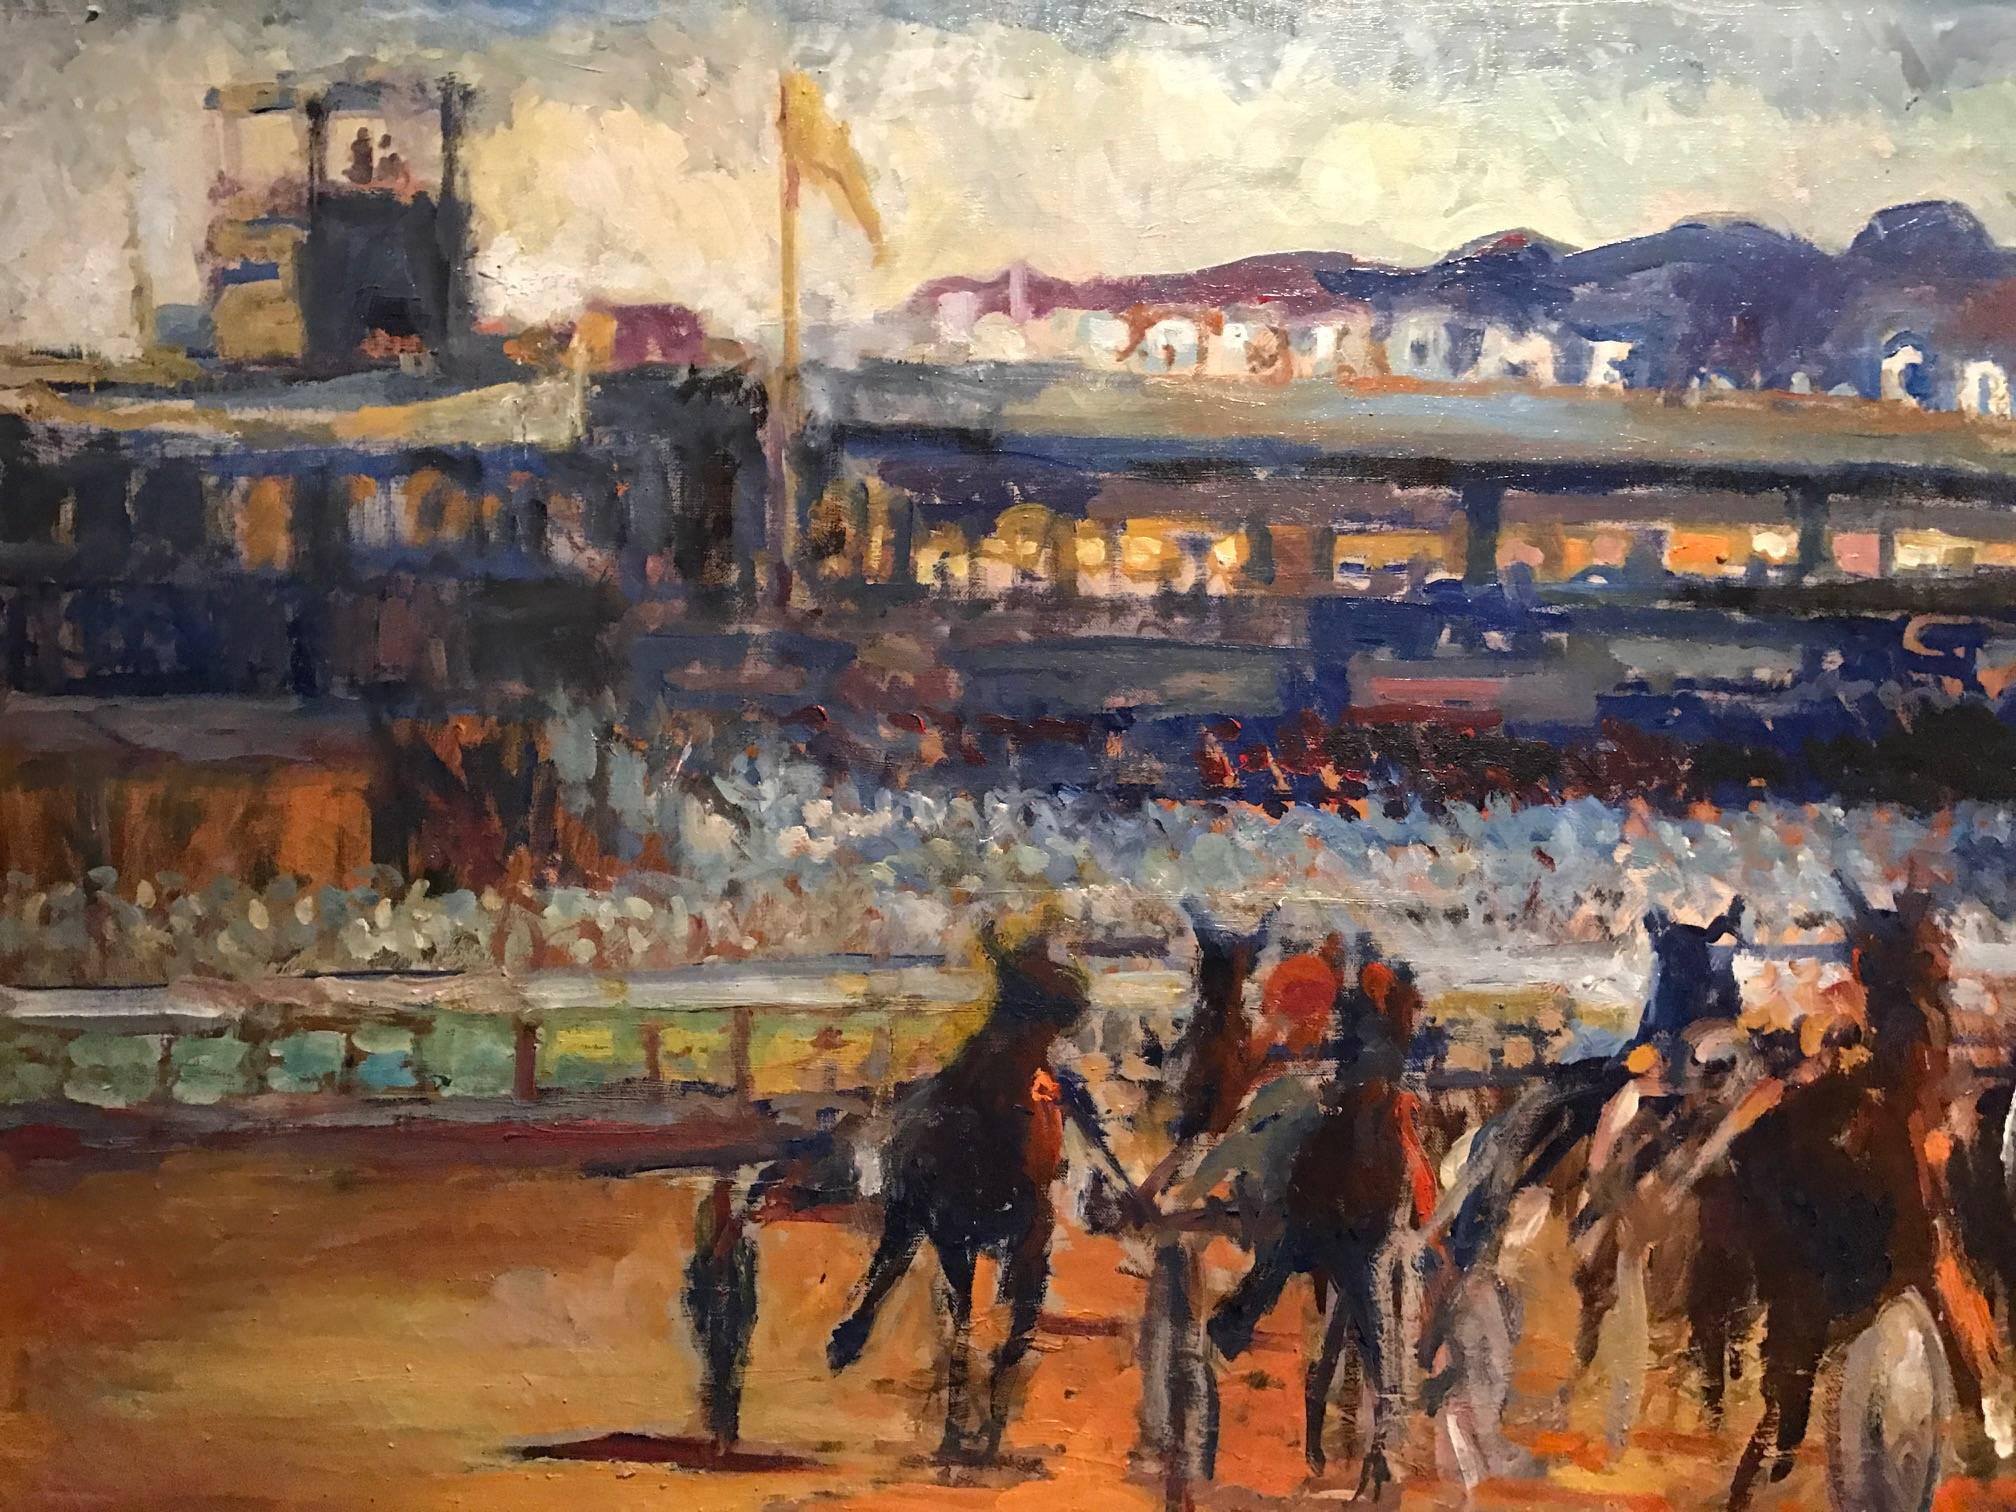 Stunning original French oil painting capturing the thundering hooves of these racehorses at the Hippodrome Cote d'Azur (Cagnes-sur-Mer, near Nice) as they race towards the viewer in this beautiful painting by the well listed French painter, Paul